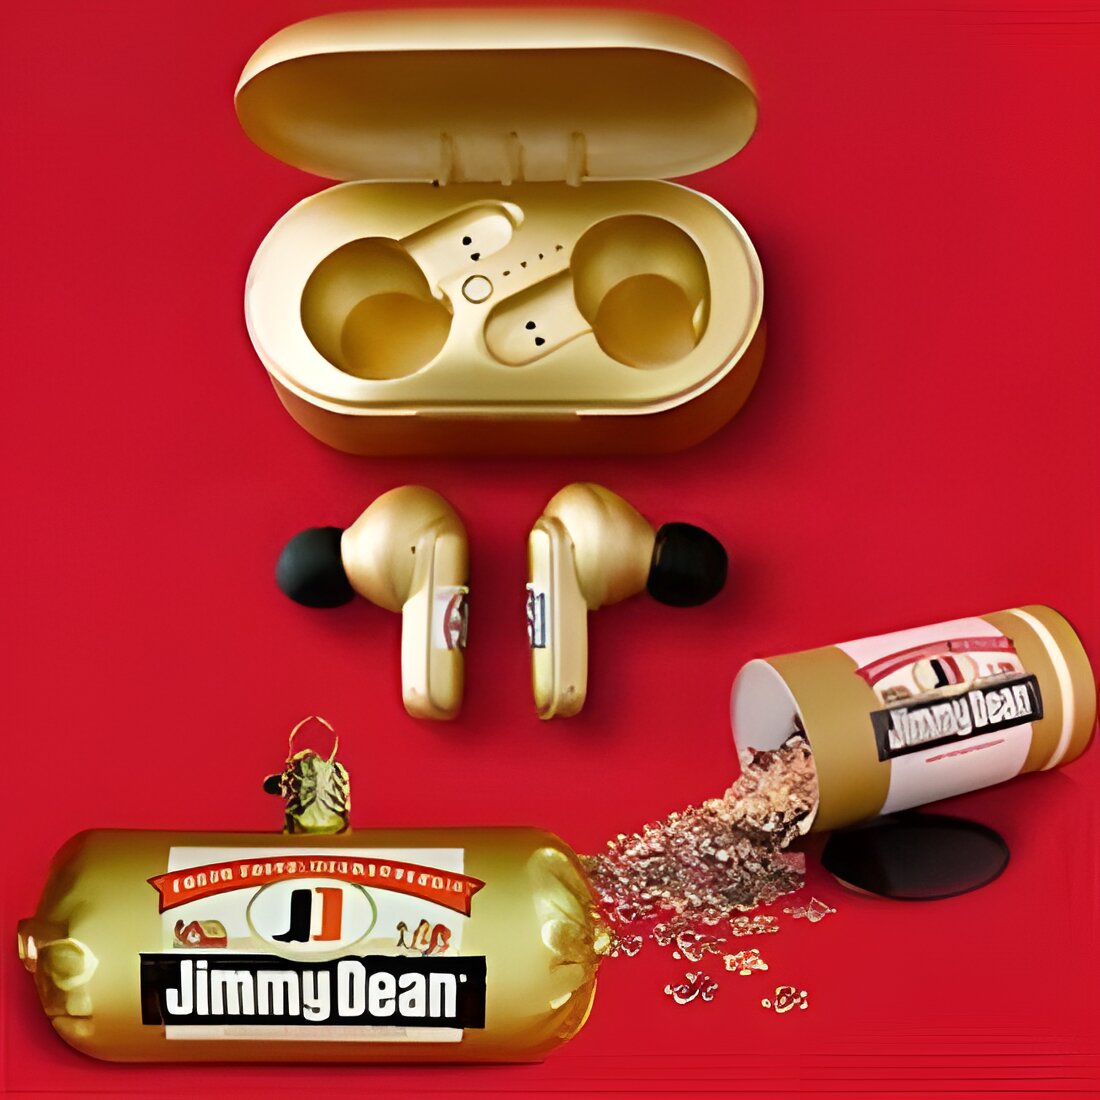 Free Holiday Gift from Jimmy Dean